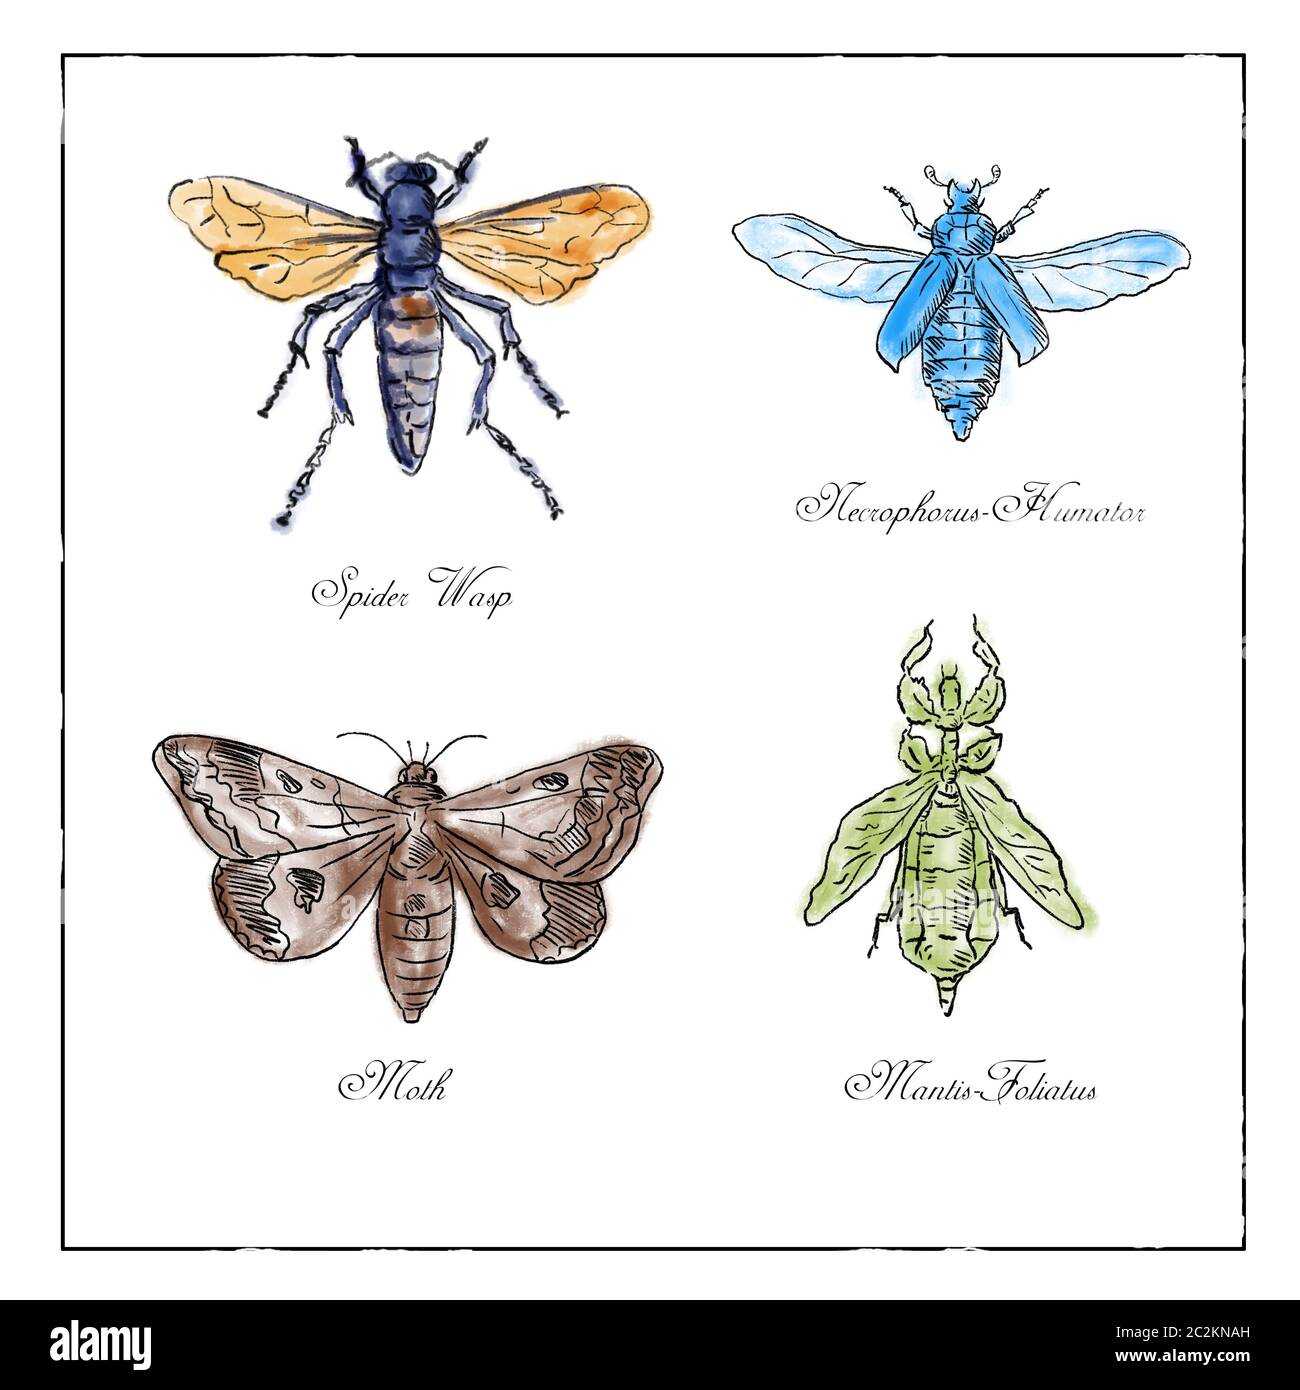 Vintage drawing illustration of a collection of insects like the Spider Wasp, Moth, Necrophorus Humator beetle, Mantis Foliatus in full color on isola Stock Photo